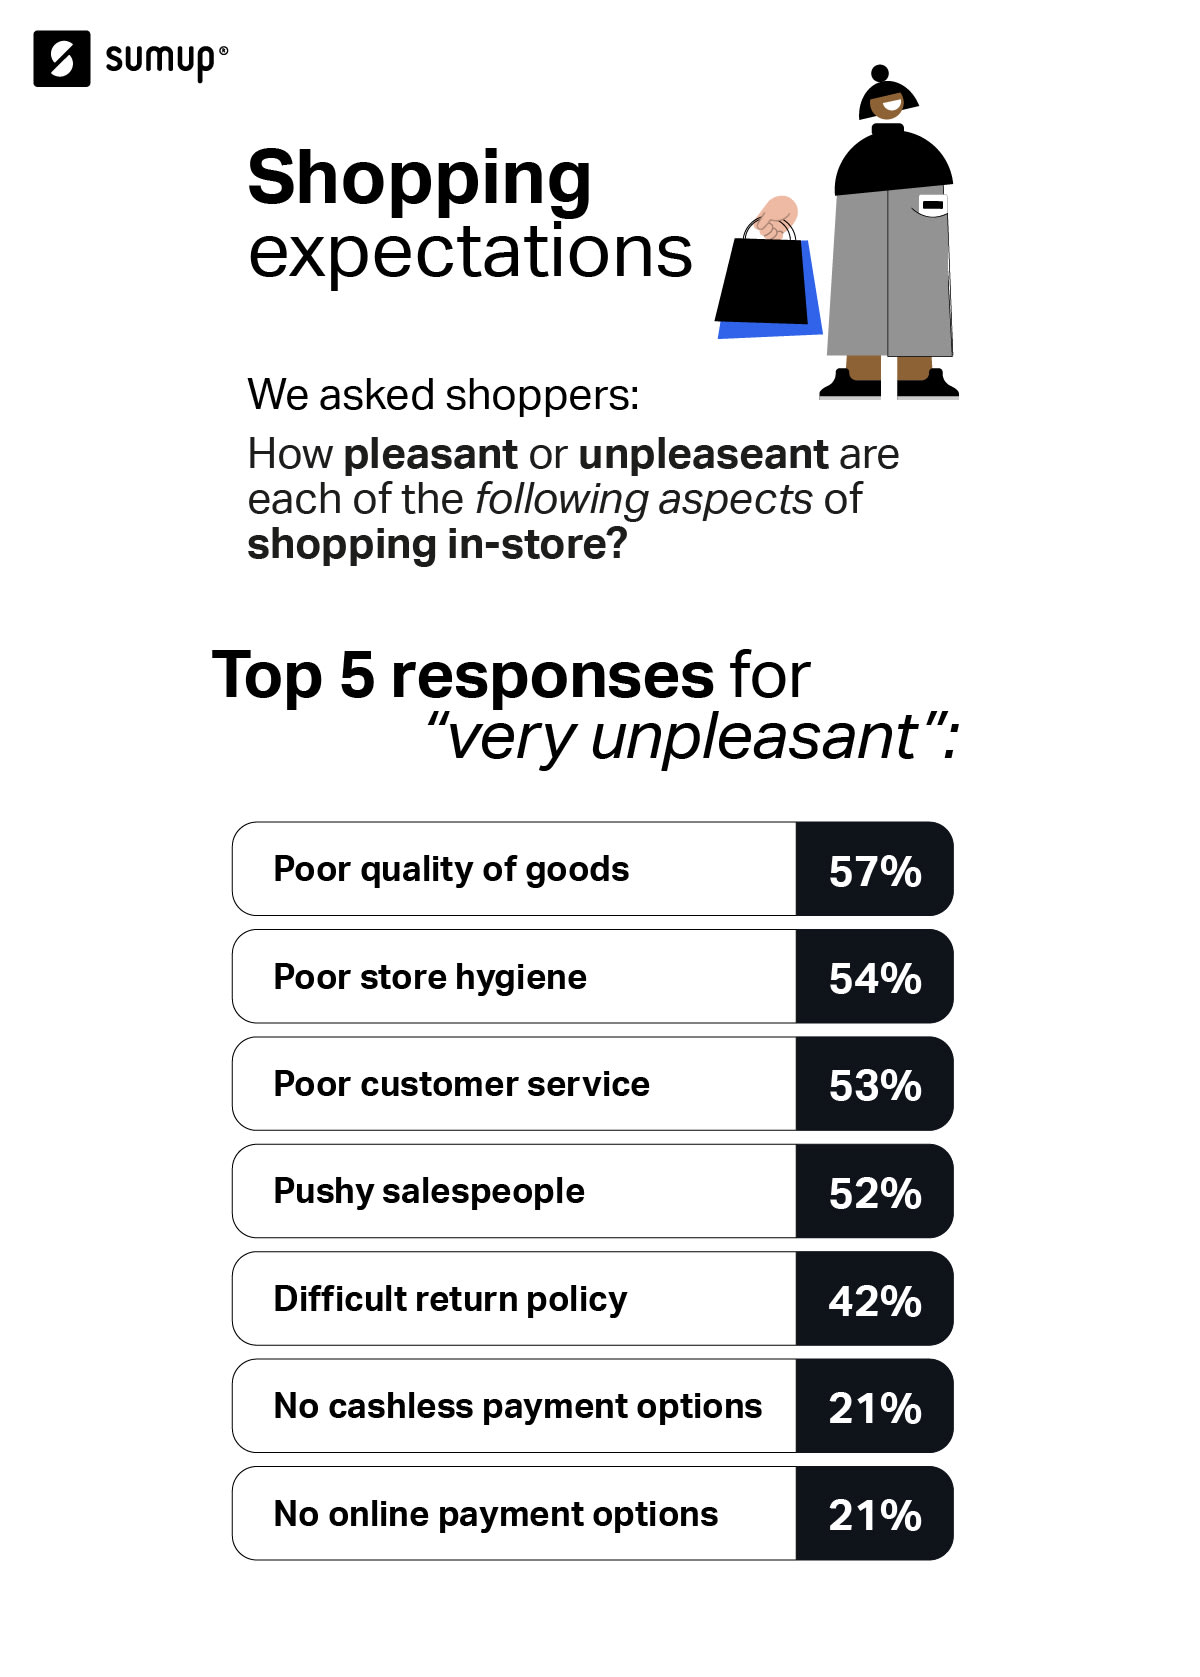 shopping expectations in the UK